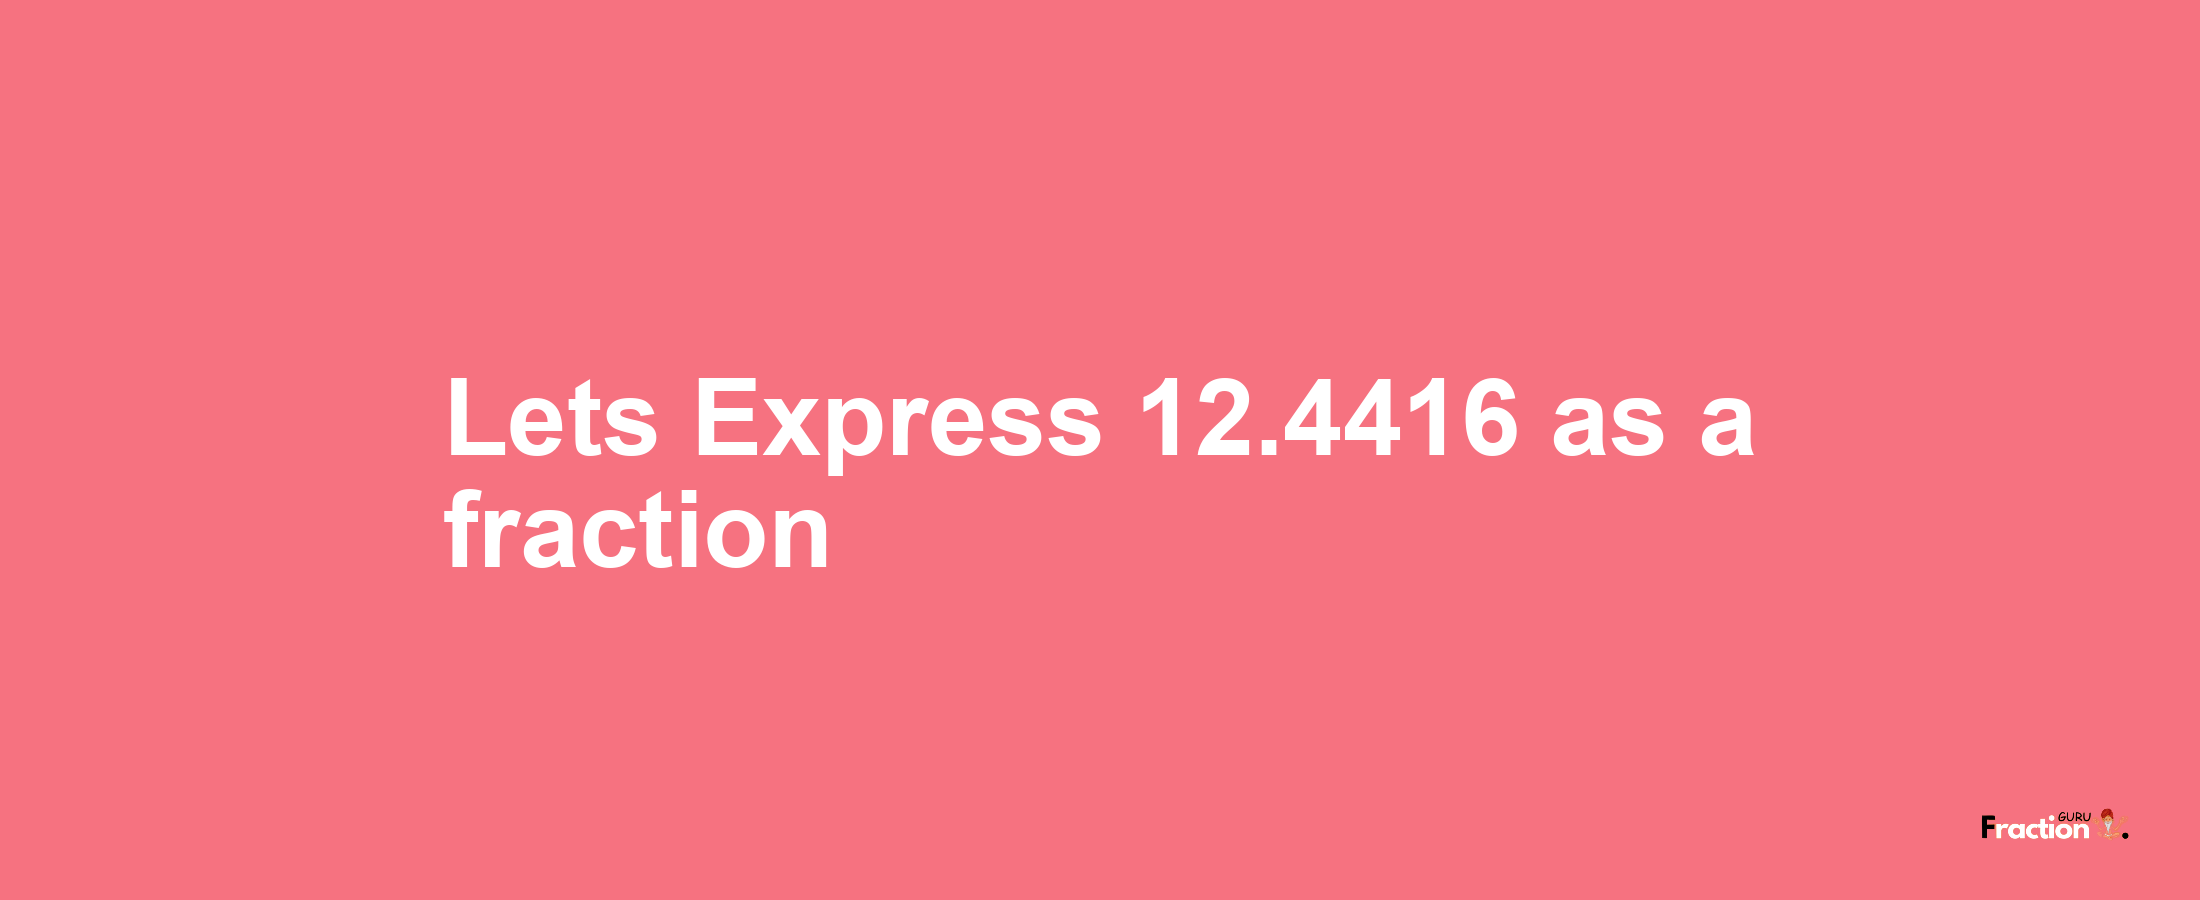 Lets Express 12.4416 as afraction